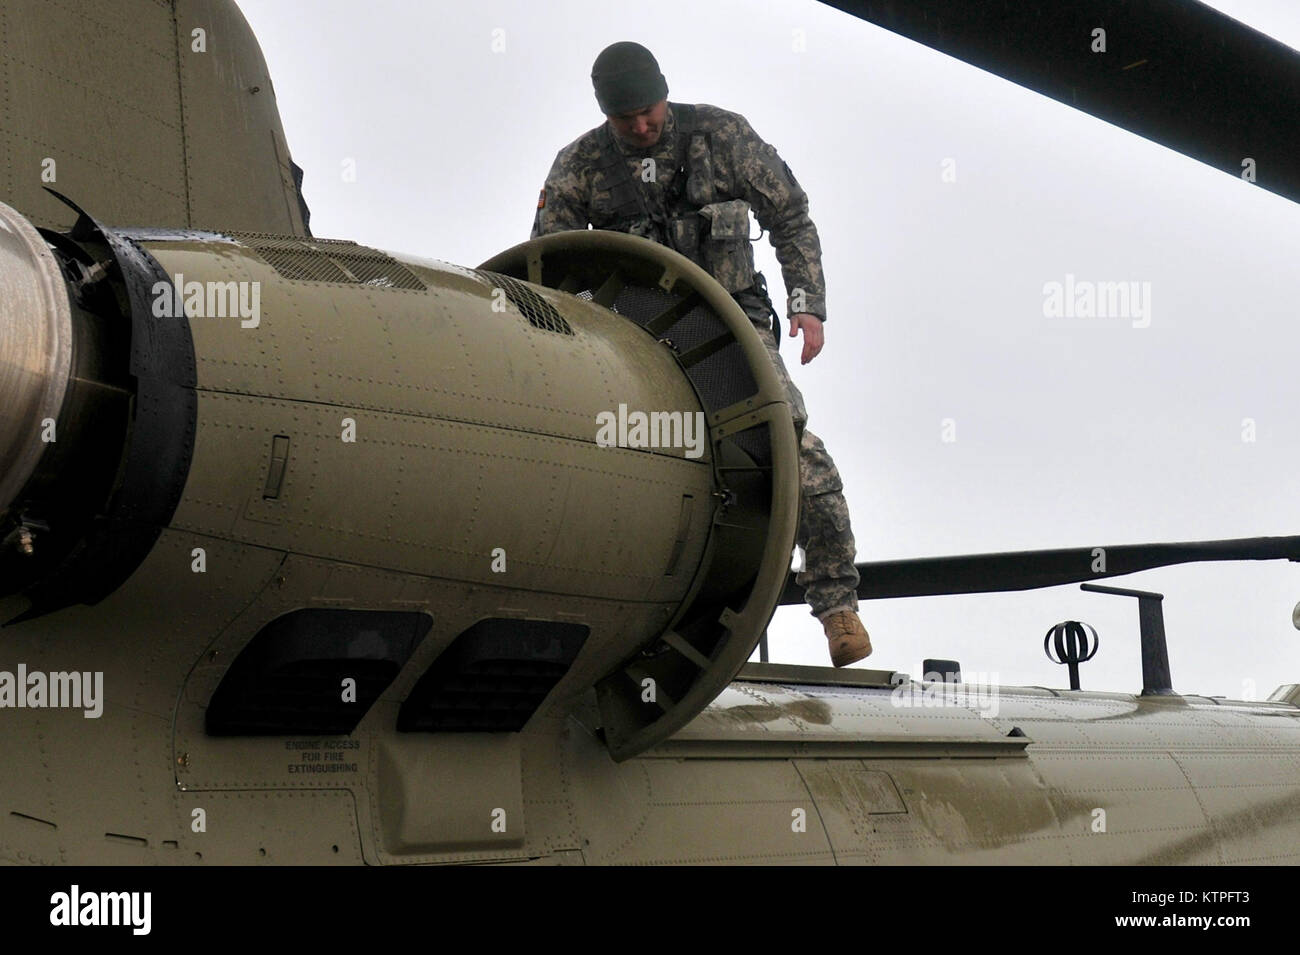 SYRACUSE, NY - Army Staff Sgt. Mike Landaur completes a safety check of a CH-47F Chinook Helicopter on March 14, 2015. Staff Sgt. Landaur is a CH-47F crew chief from Company B, 3rd Battalion, 126th Aviation based at the Army Aviation Support Facility at Rochester International Airport. 30 Airmen from the 274th Air Support Operations Squadron (ASOS), based at Hancock Field Air National Guard Base and the Army aircrew trained together for the first time. The training included Joint Terminal Attack Controller (or JTAC) Airmen from the 274th ASOS conducting CH-47 helicopter familiarization trainin Stock Photo